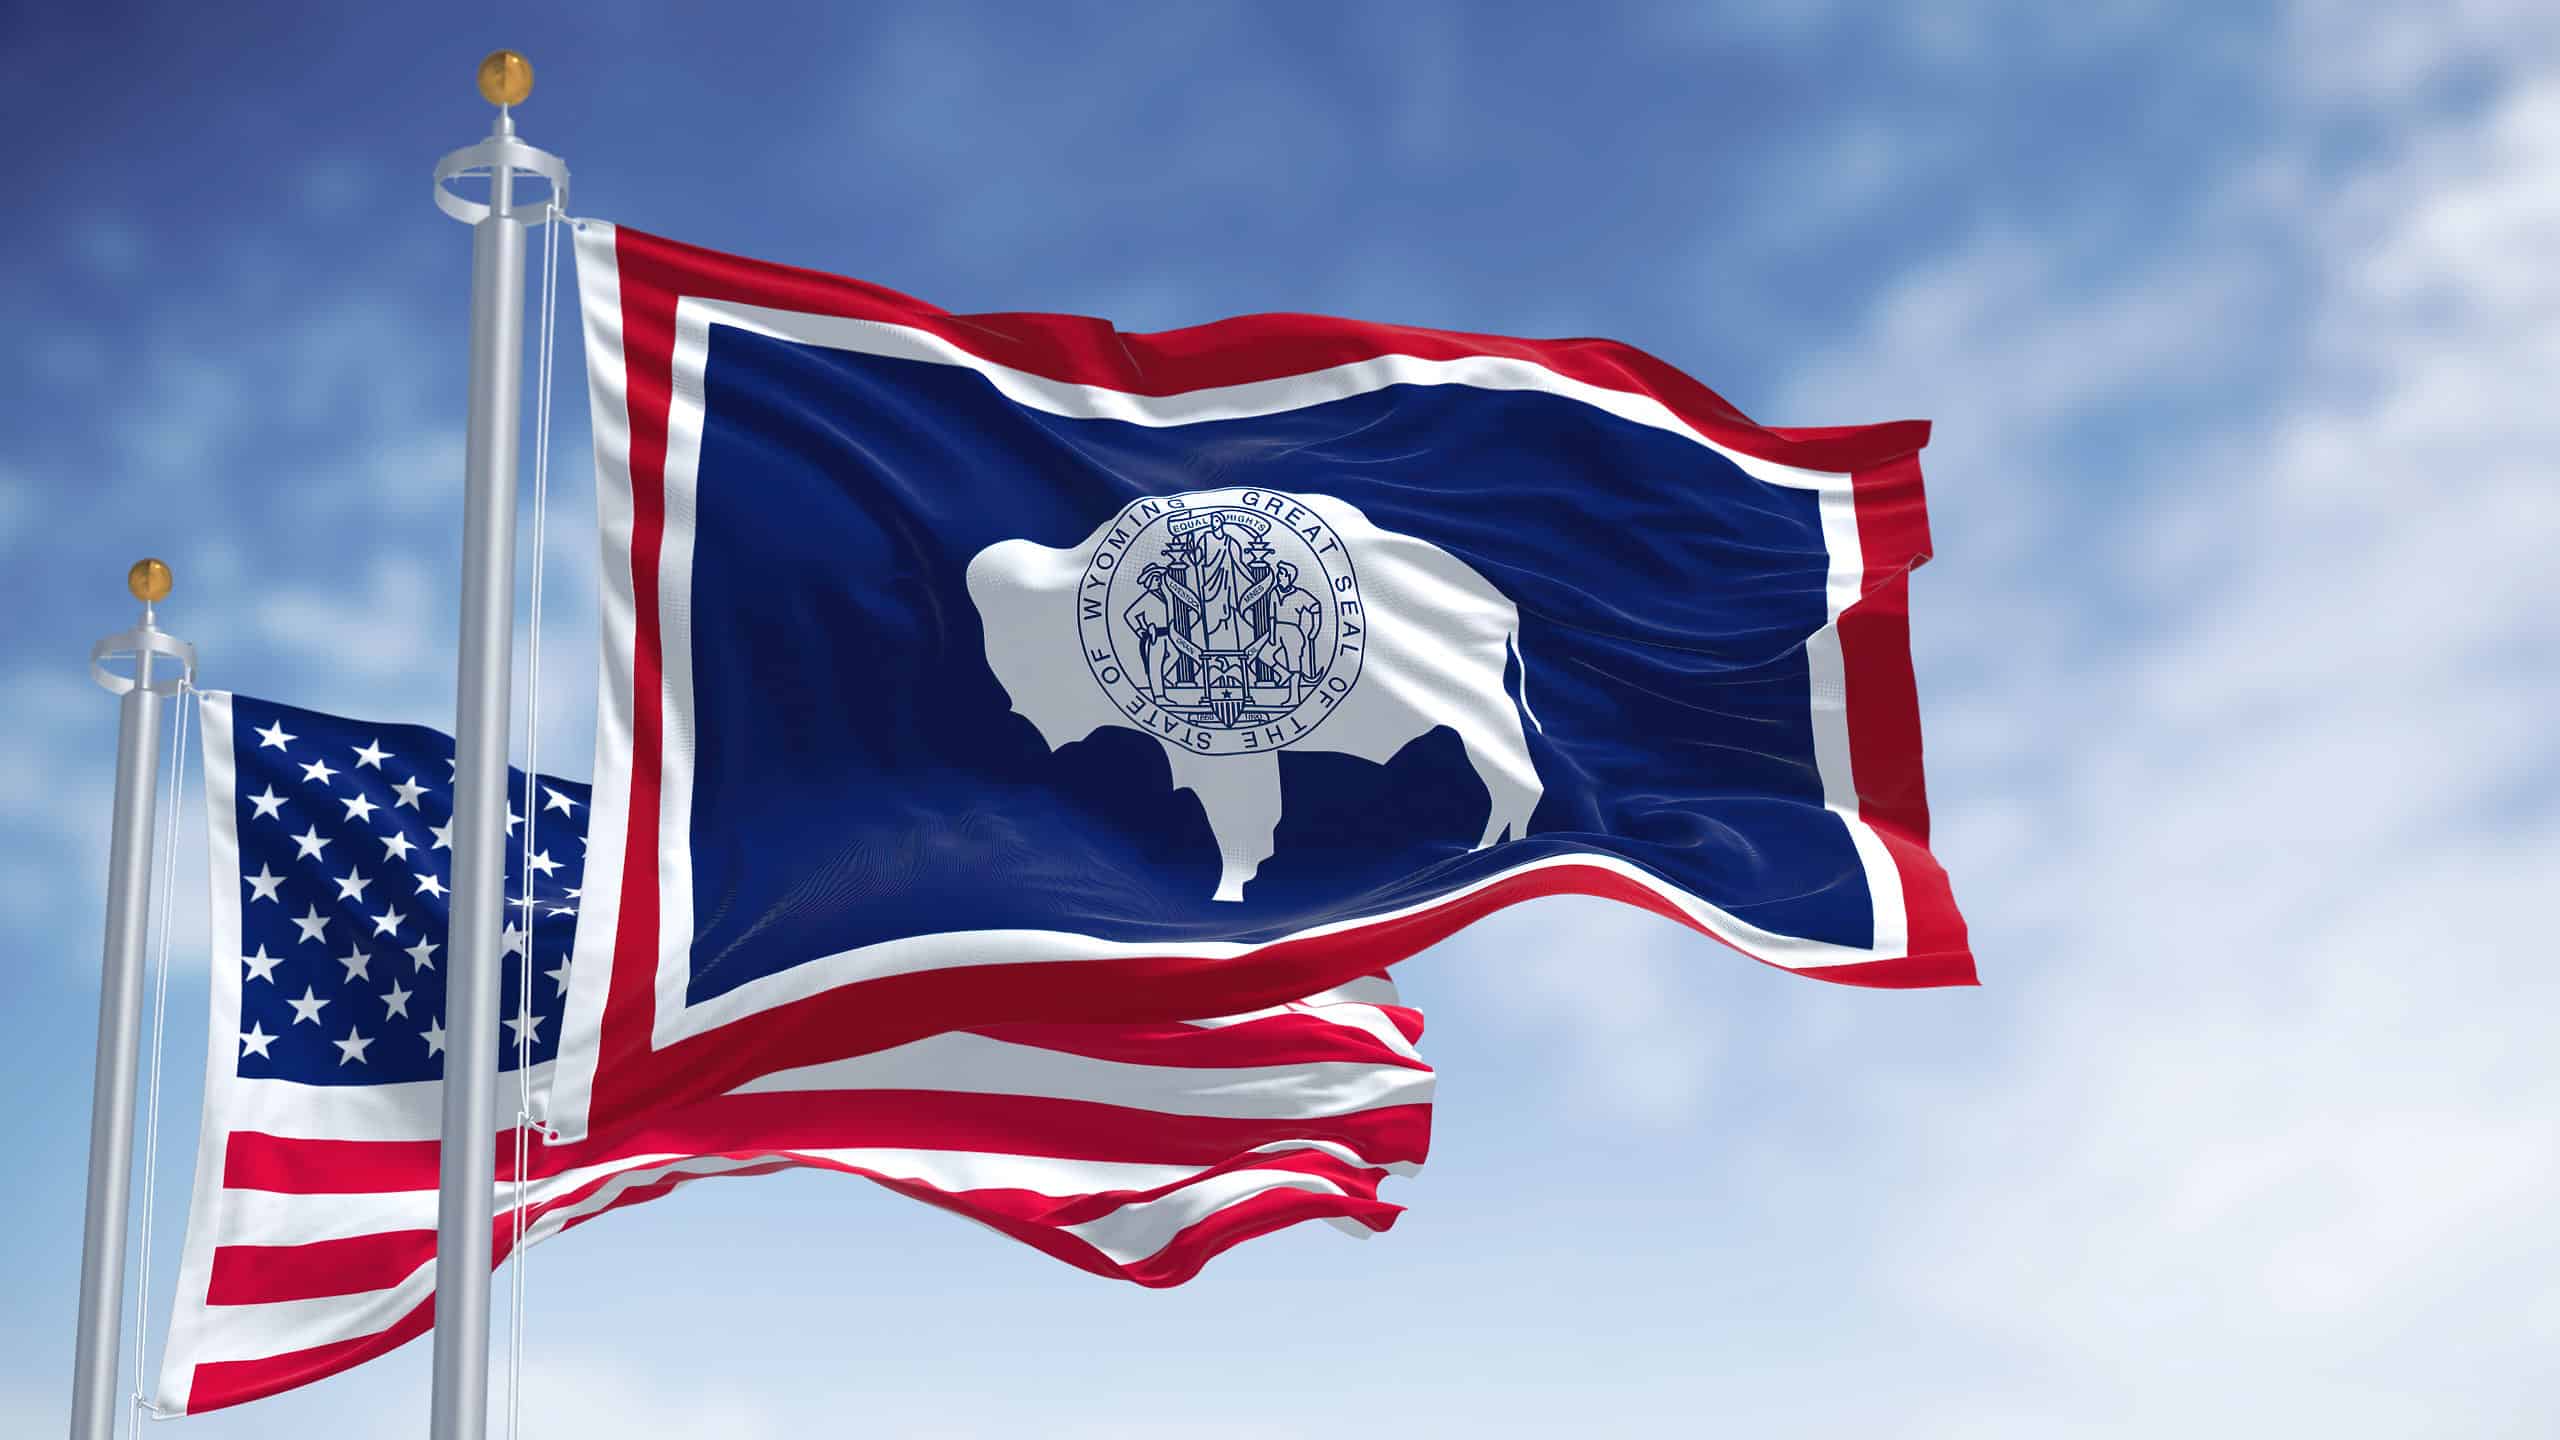 Wyoming state flag with the American flag flying behind it